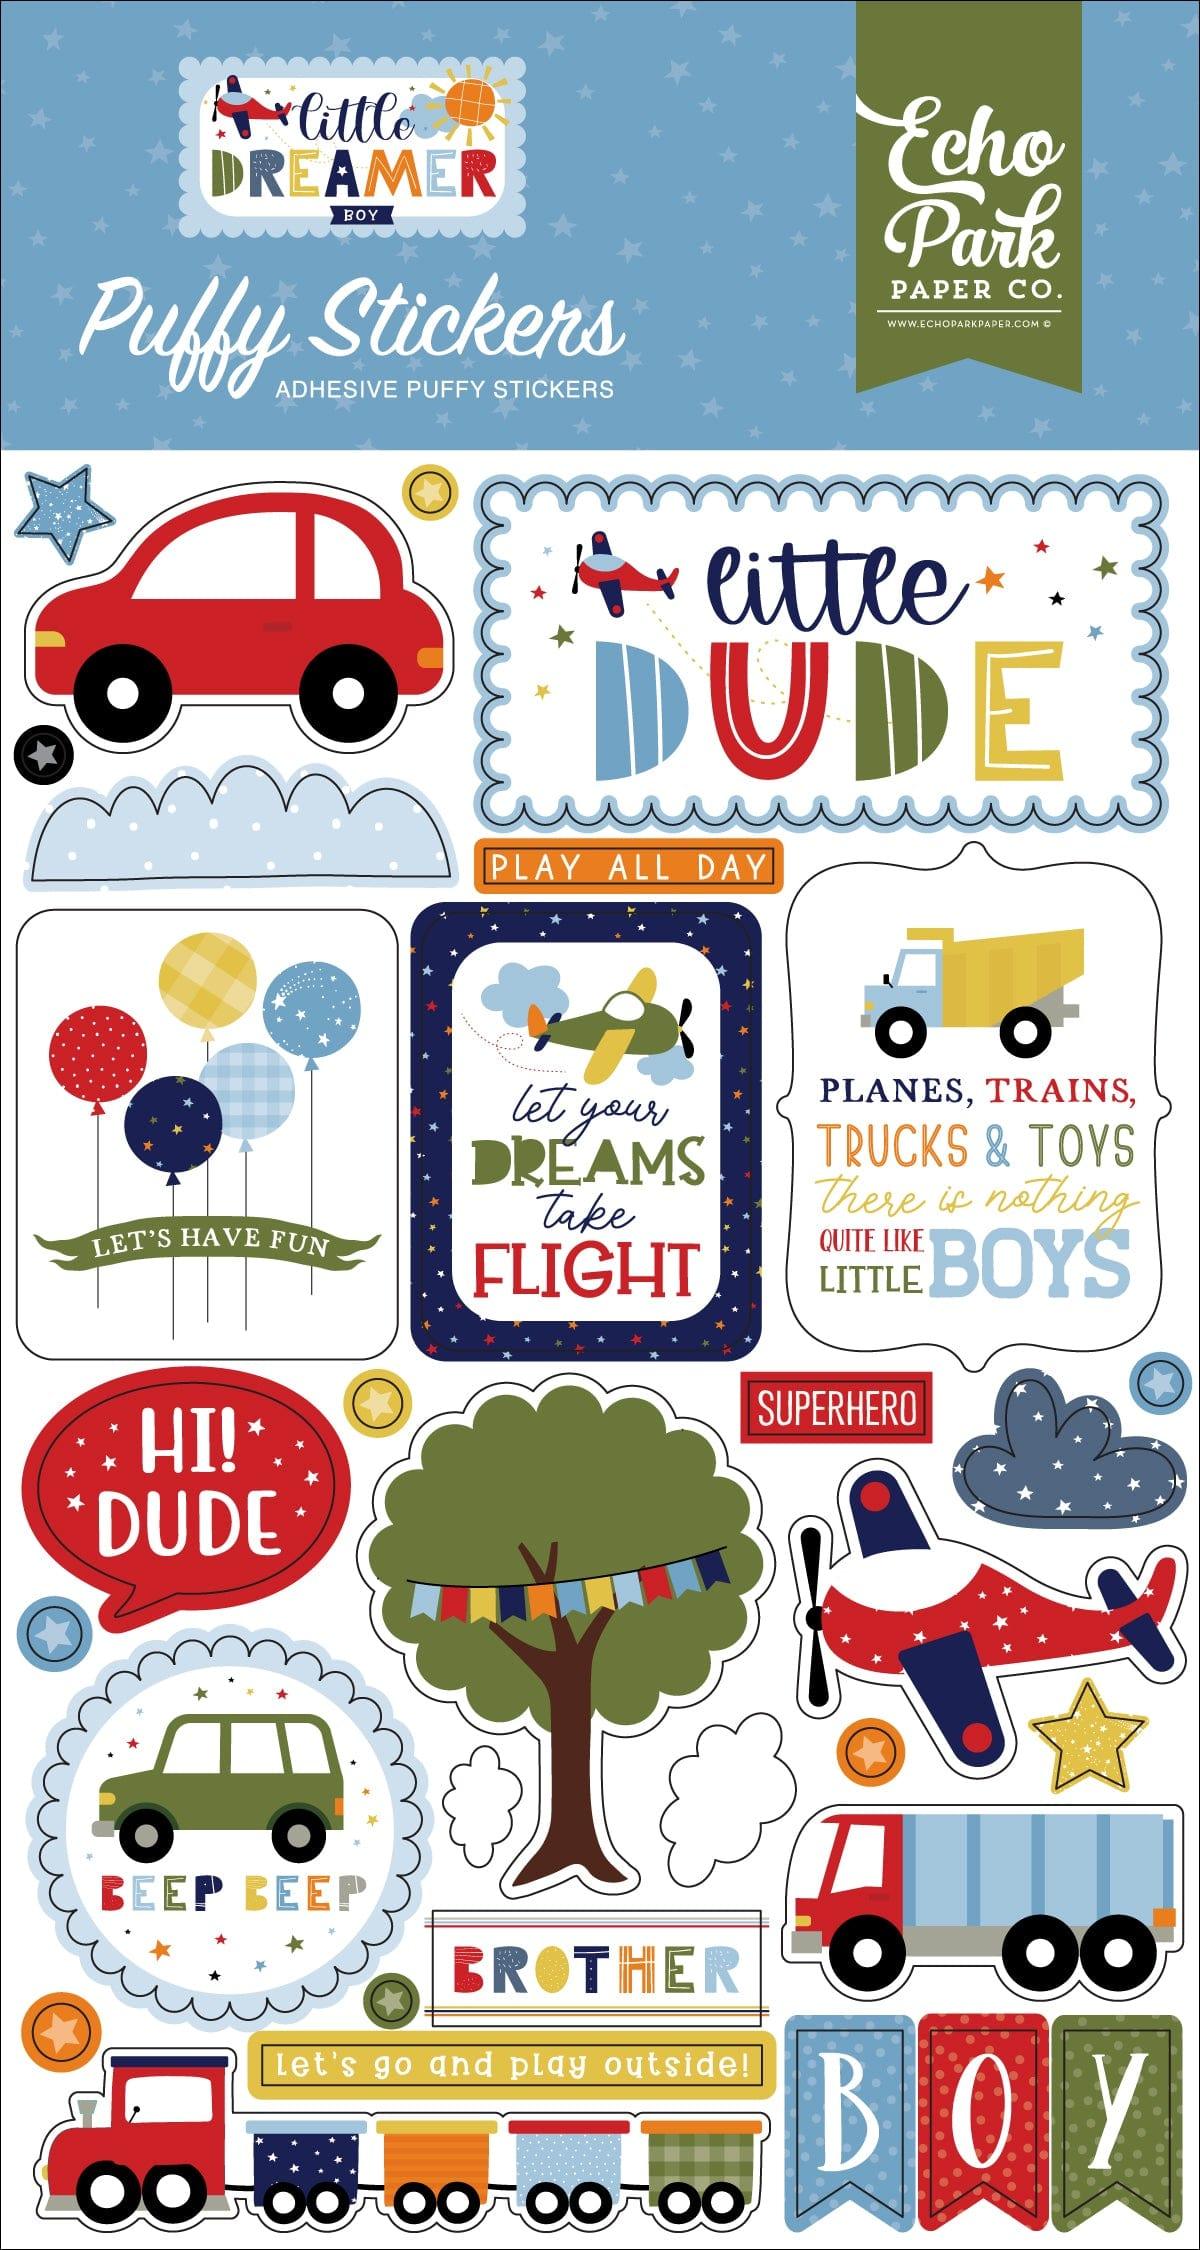 Little Dreamer Boy Collection 4 x 7 Puffy Stickers Scrapbook Embellishments by Echo Park Paper - Scrapbook Supply Companies